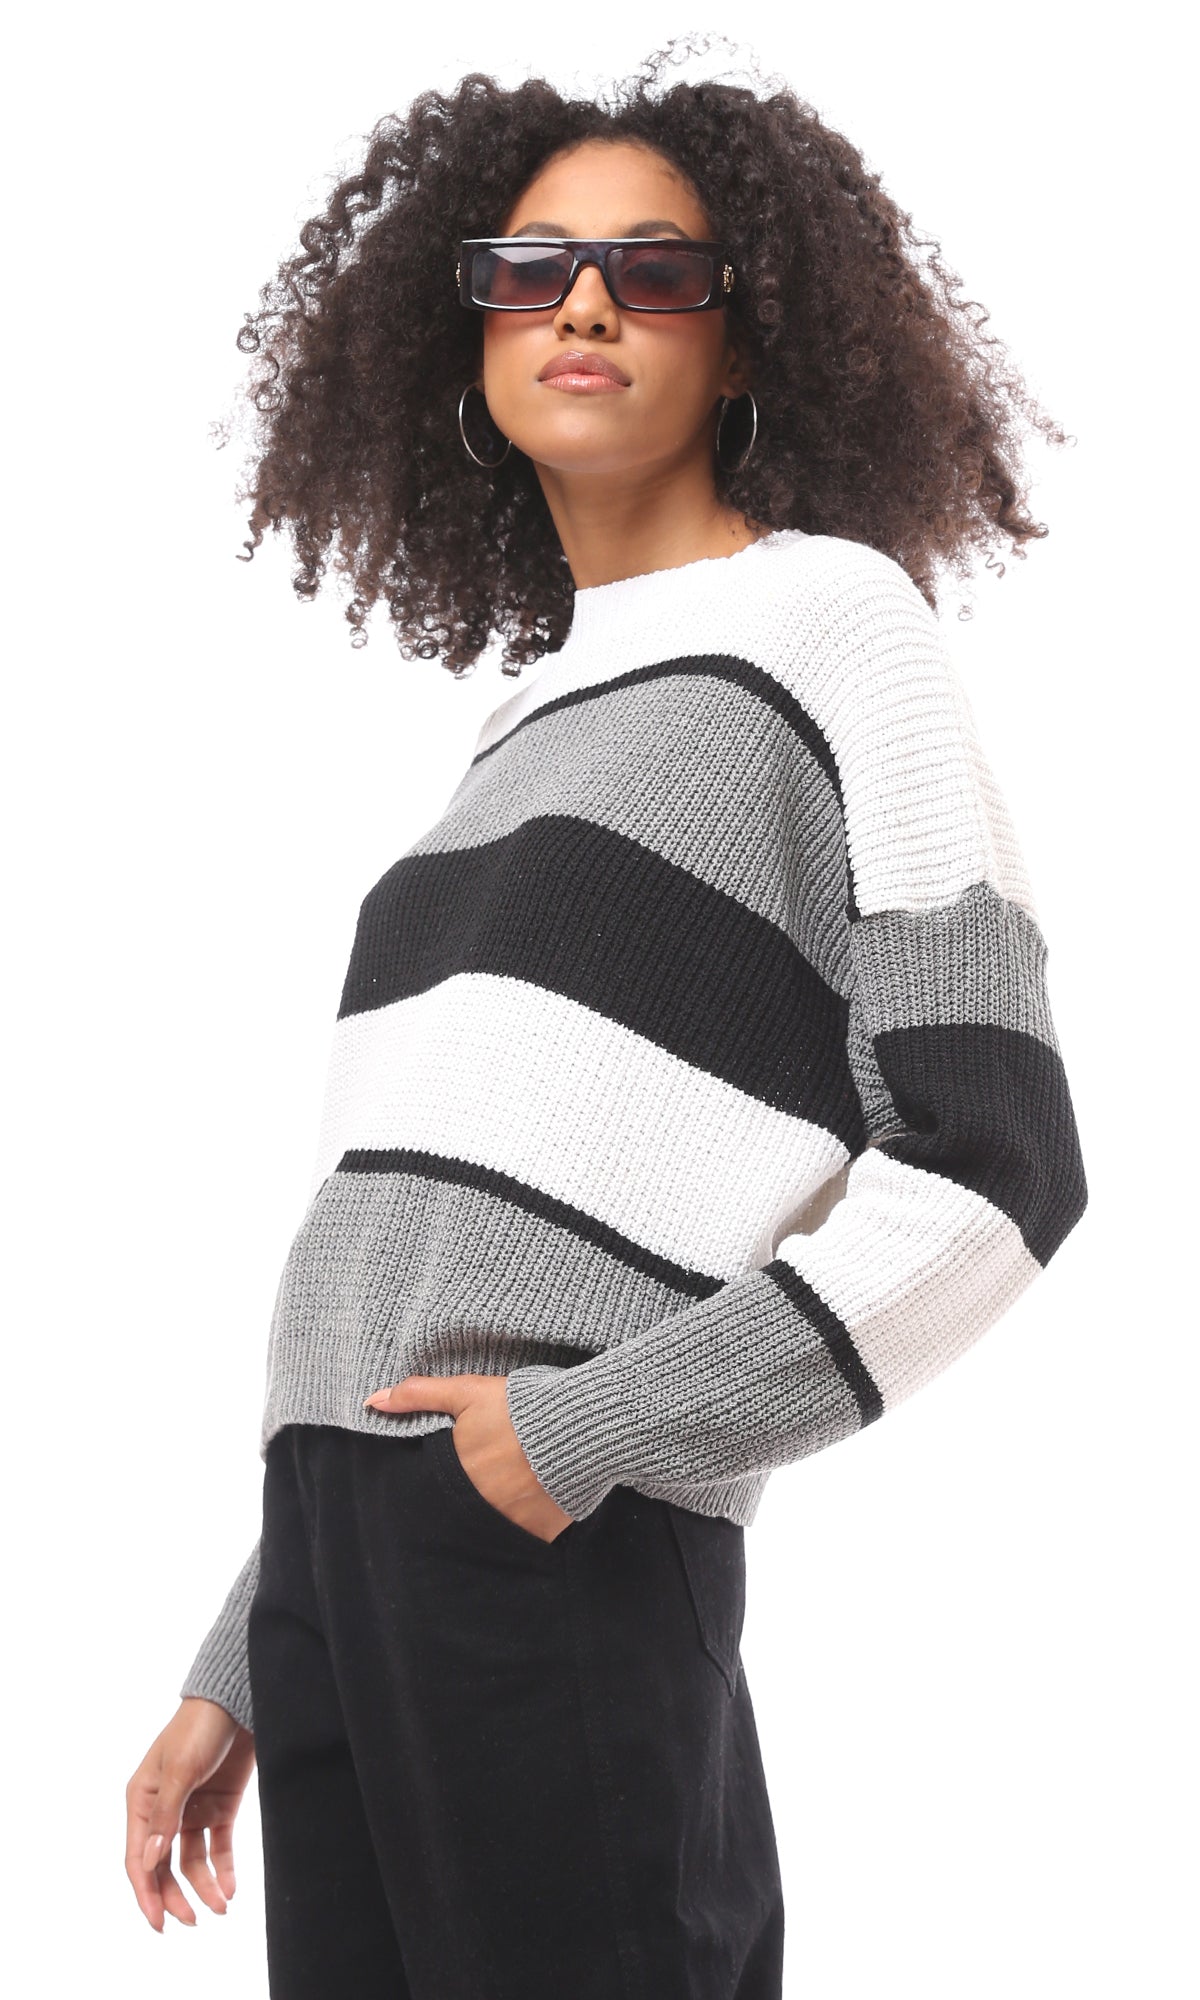 O171193 Tri-Tone Grey, White & Black Knitted Pullover